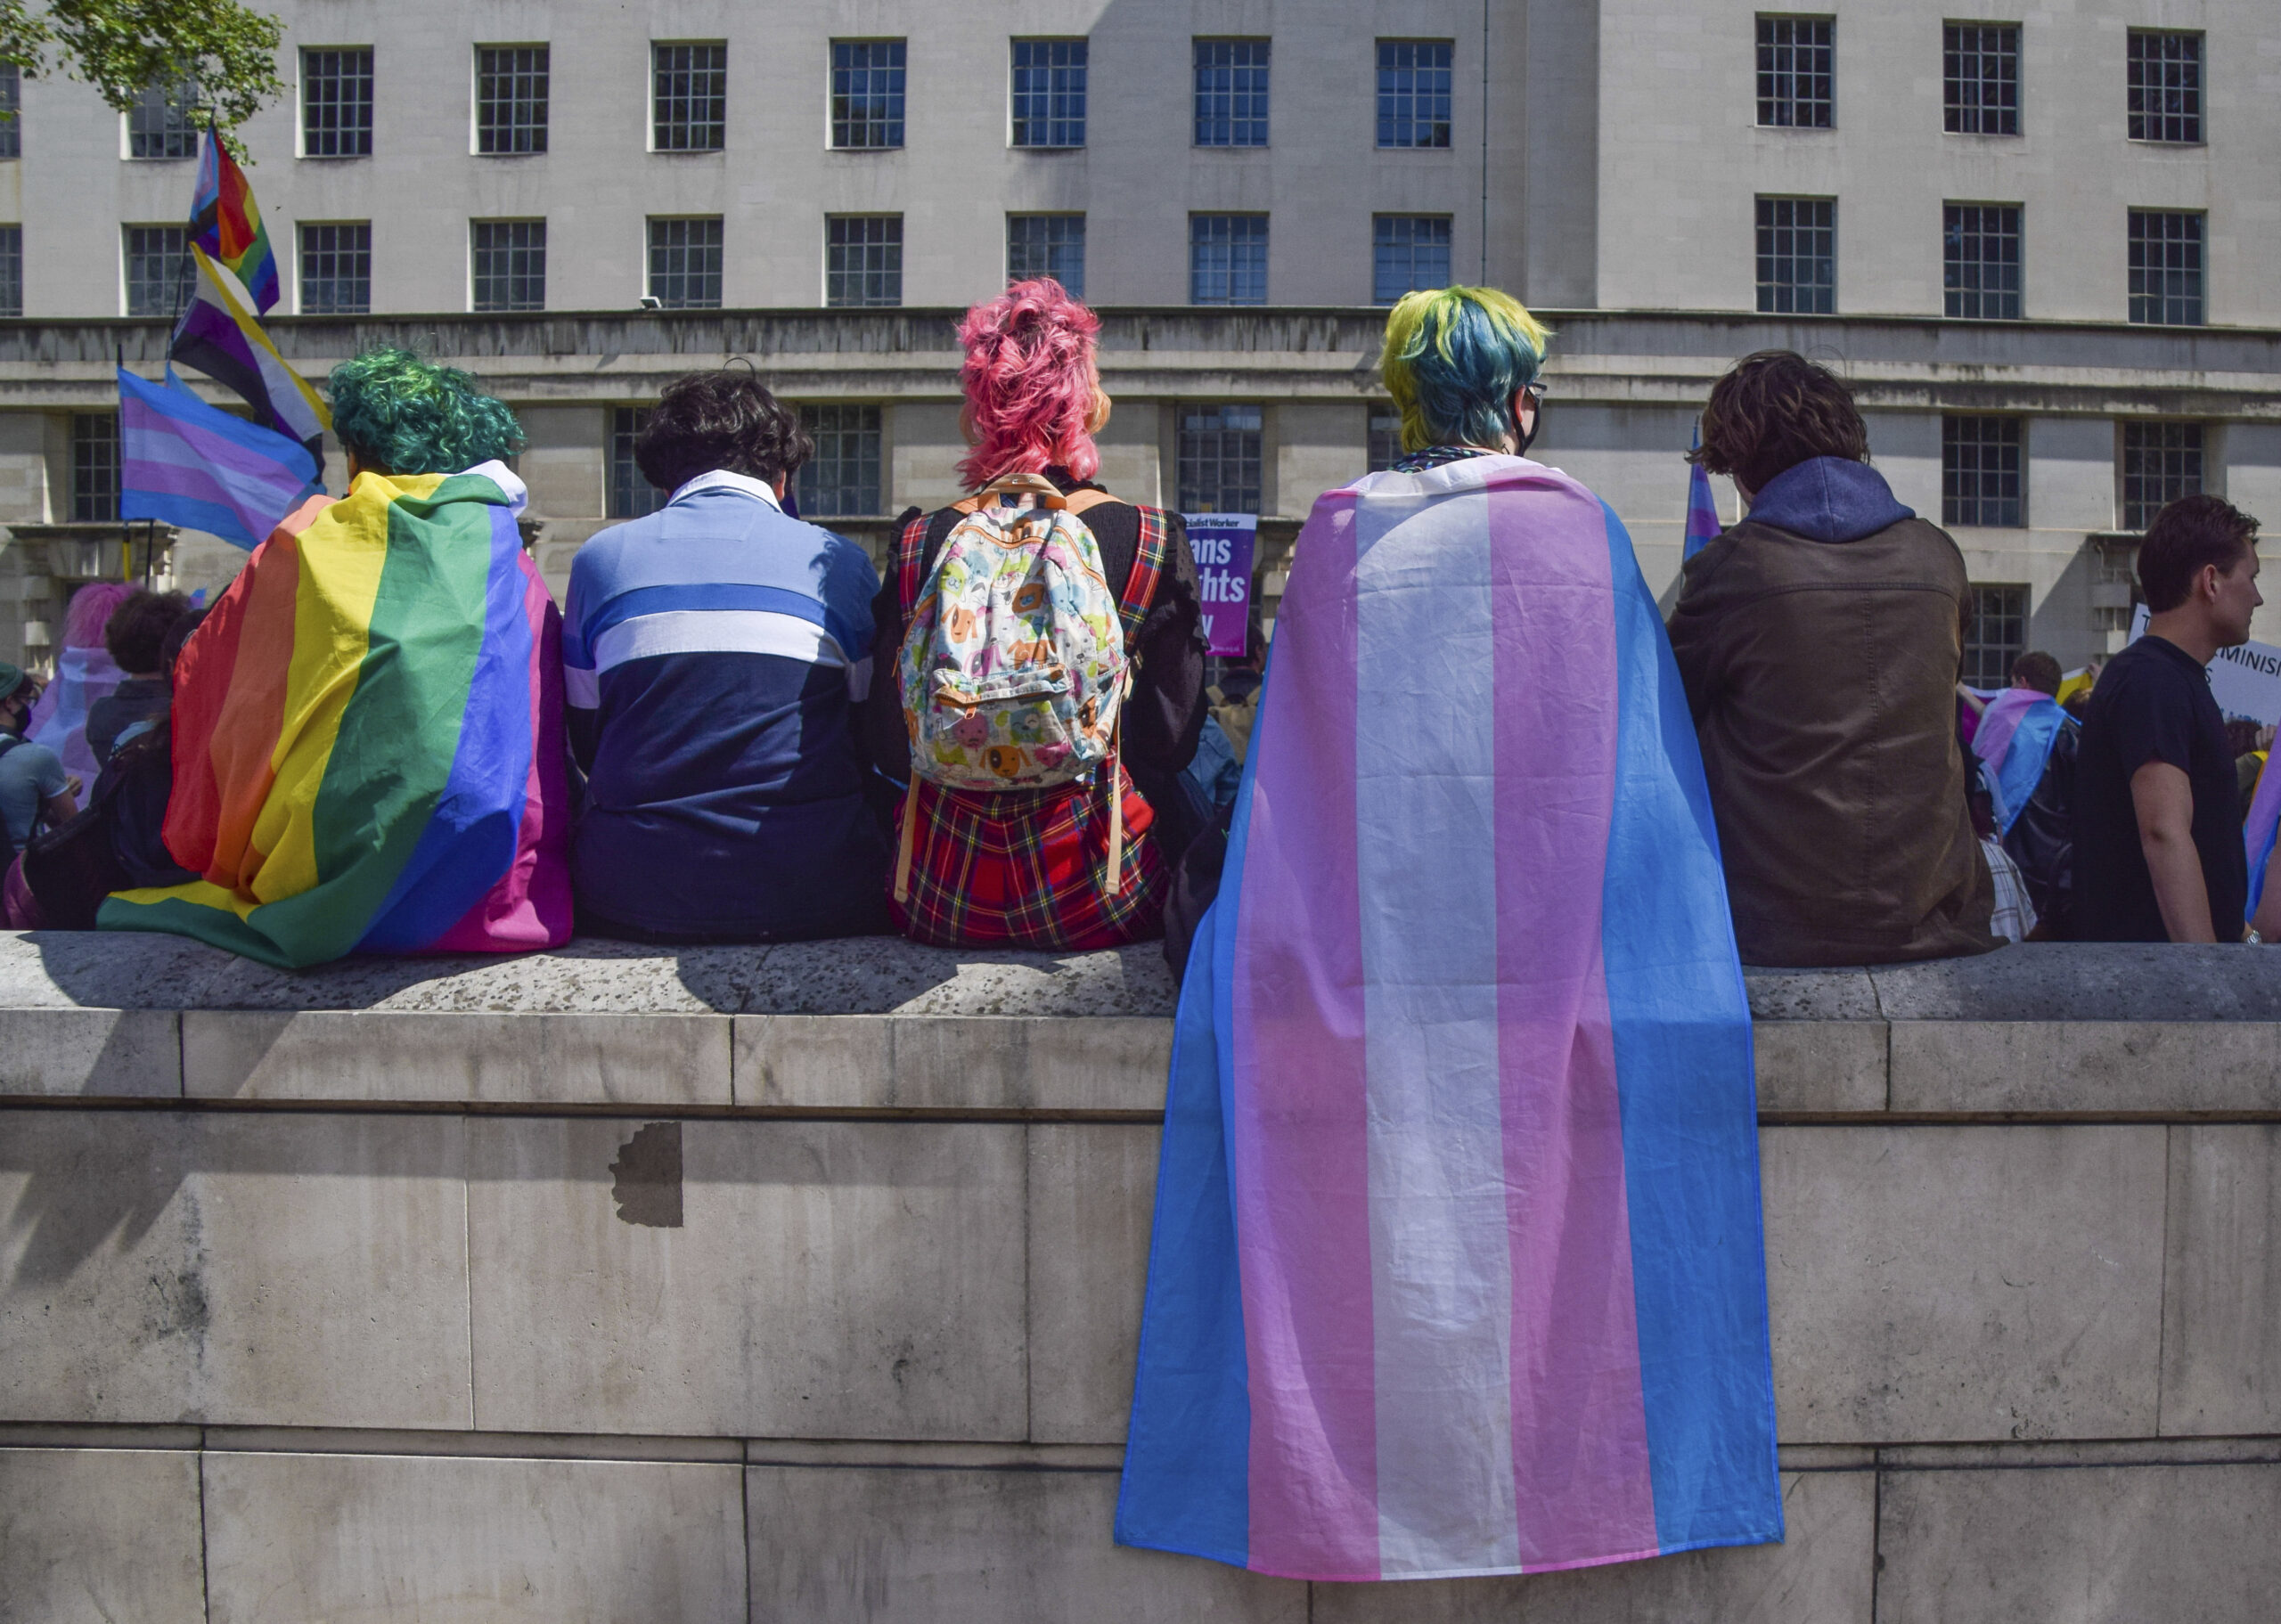 Protesters wrapped in pride and trans pride flags sit on a wall during the trans rights demonstration